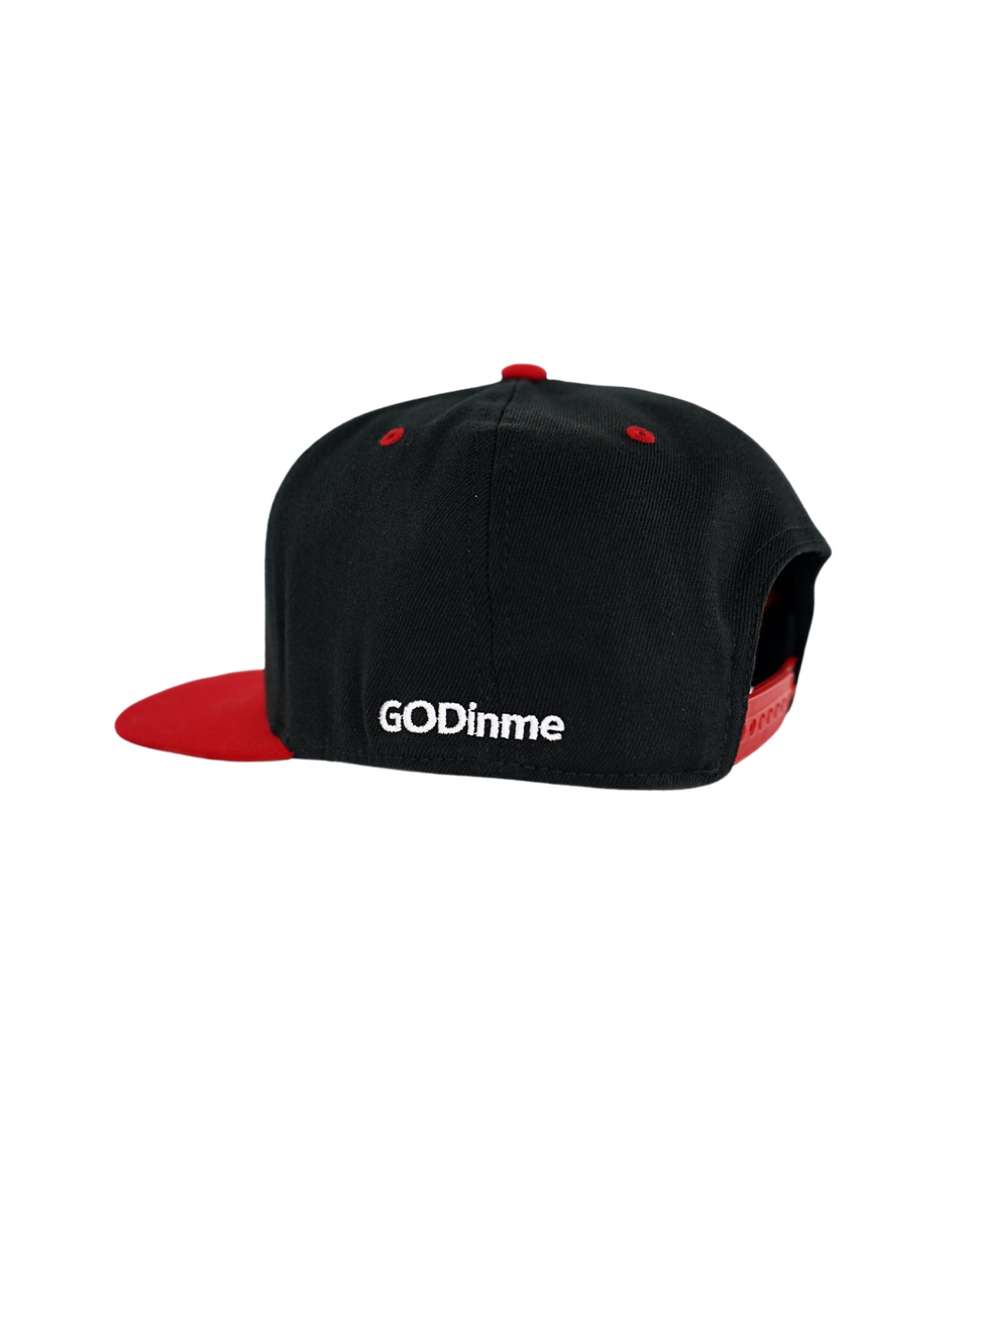 2 tone Black and Red premium wool design with moisture-wicking sweatband; featuring a bold White puff logo on front and embroidered detail GODinme on left side. Both Stylish and Comfortable.